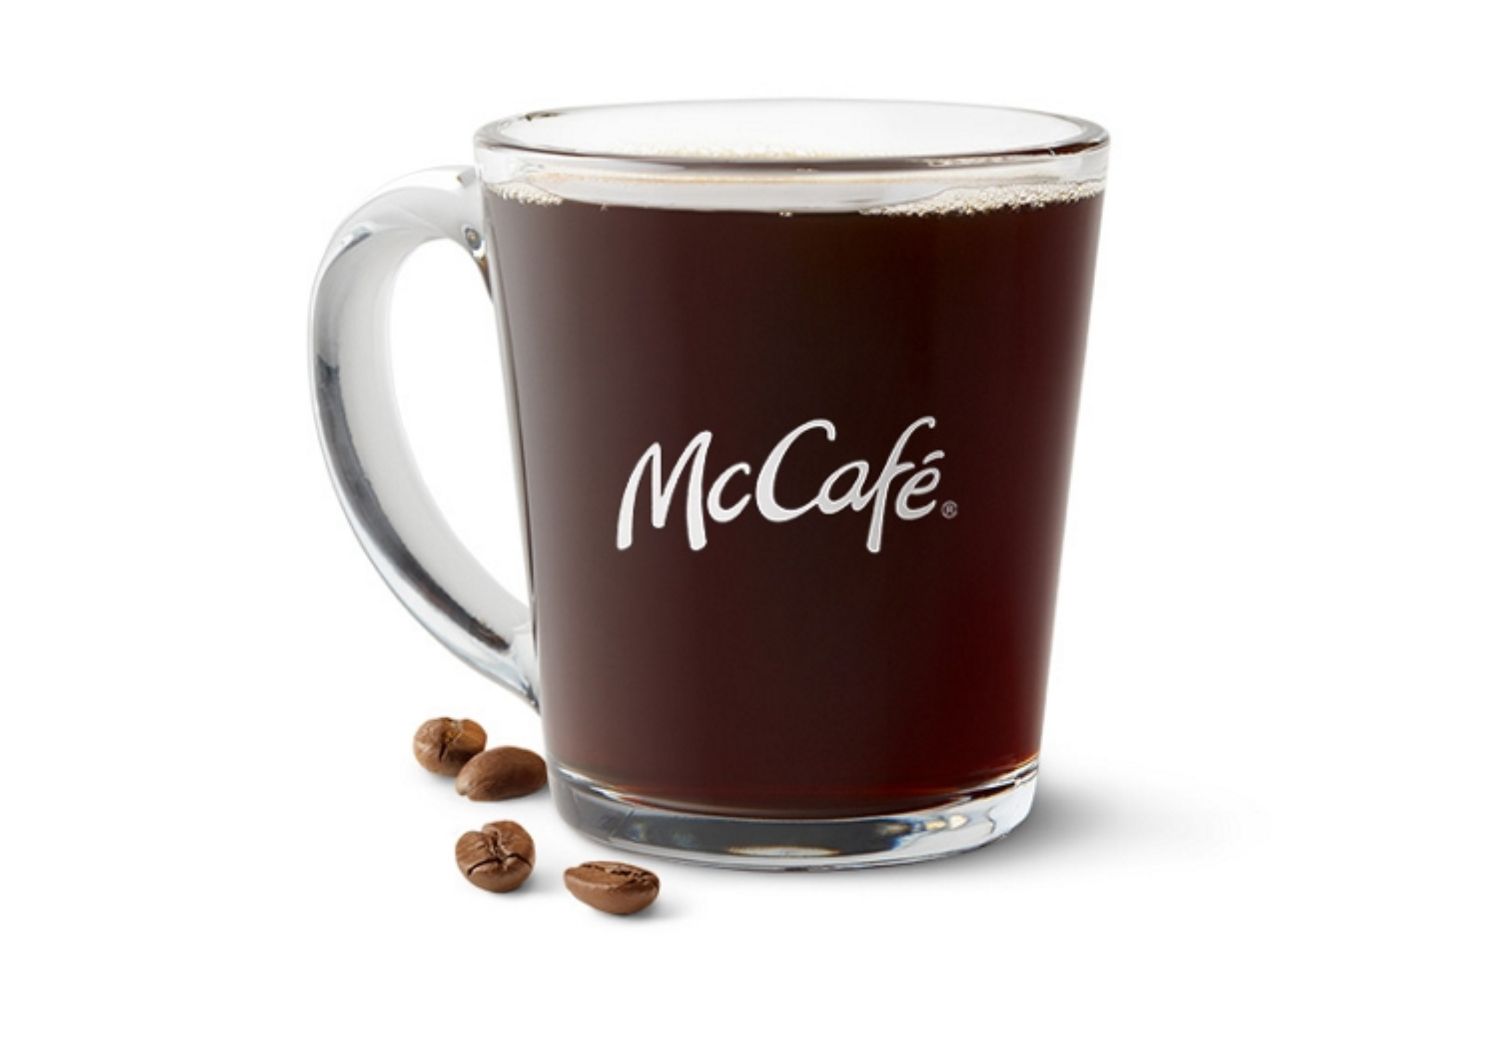 McDonald's App Users Can Enjoy $0.99 Hot or Iced Premium Roast Coffees Every Day